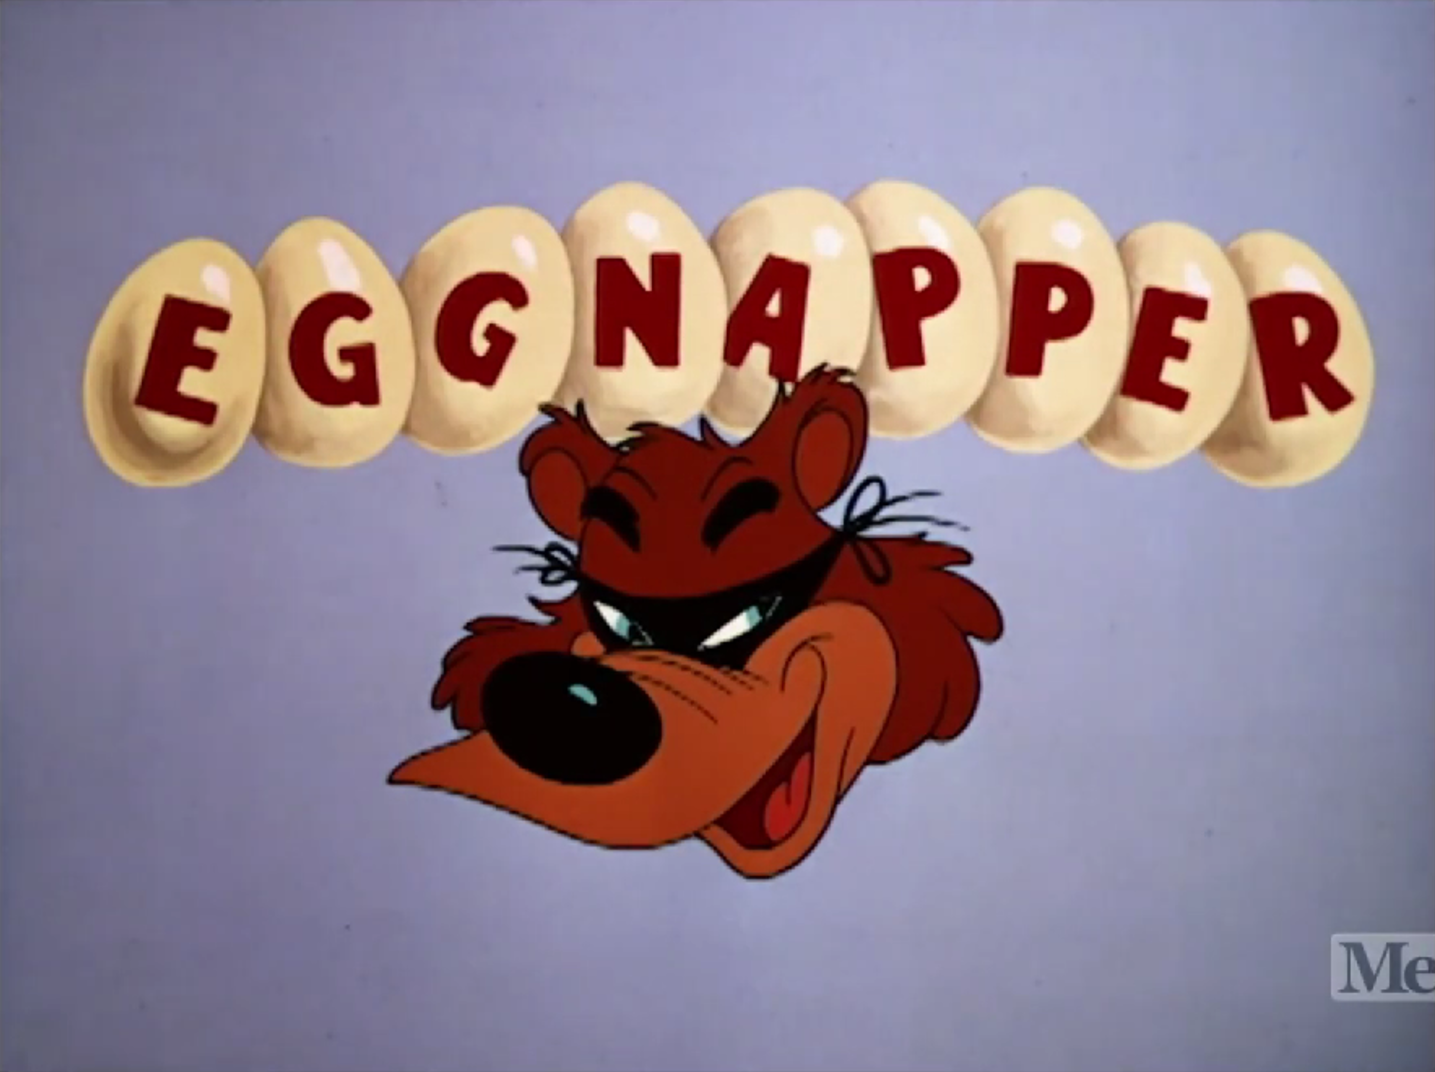 https://static.wikia.nocookie.net/walterlantz/images/4/43/Eggnapper_%281961%29_Title_Card_Restored_version_%28MeTV_aired%29_1.png/revision/latest?cb=20230925133418